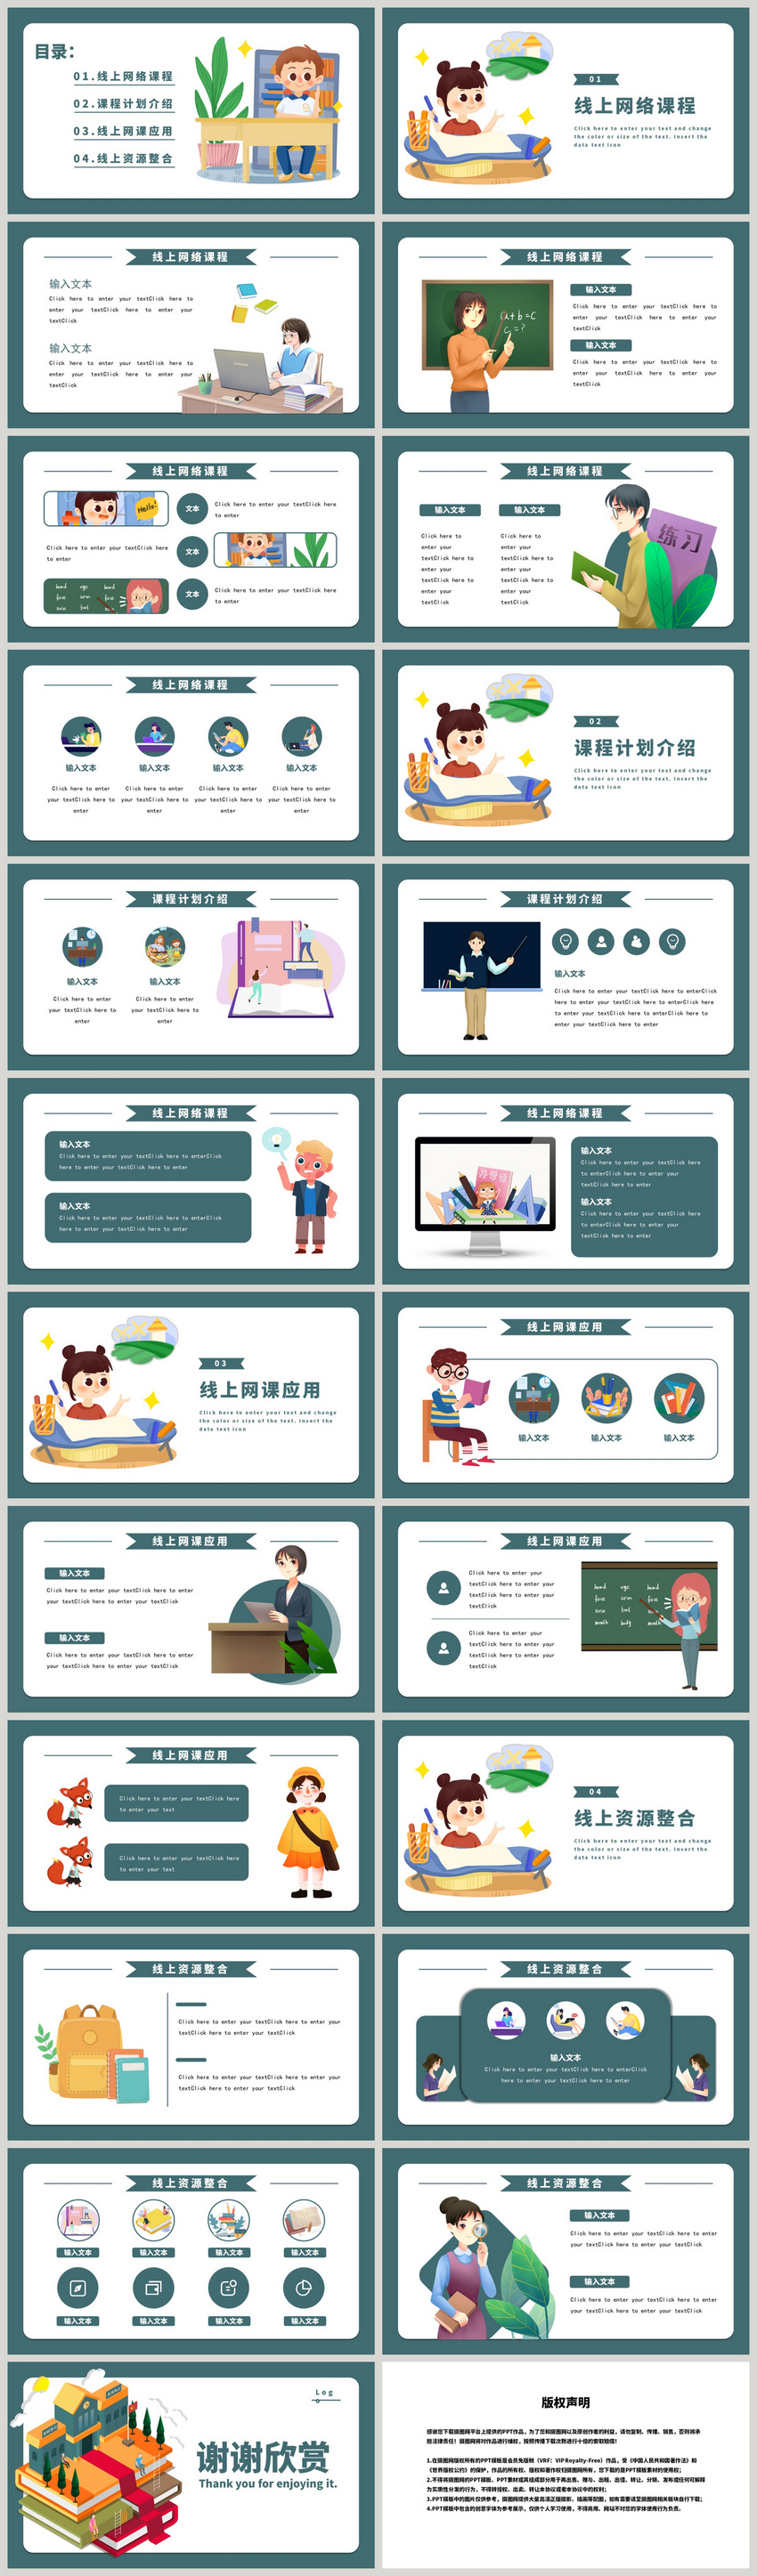 Green cartoon online e-learning education ppt template powerpoint  templete_ppt free download 